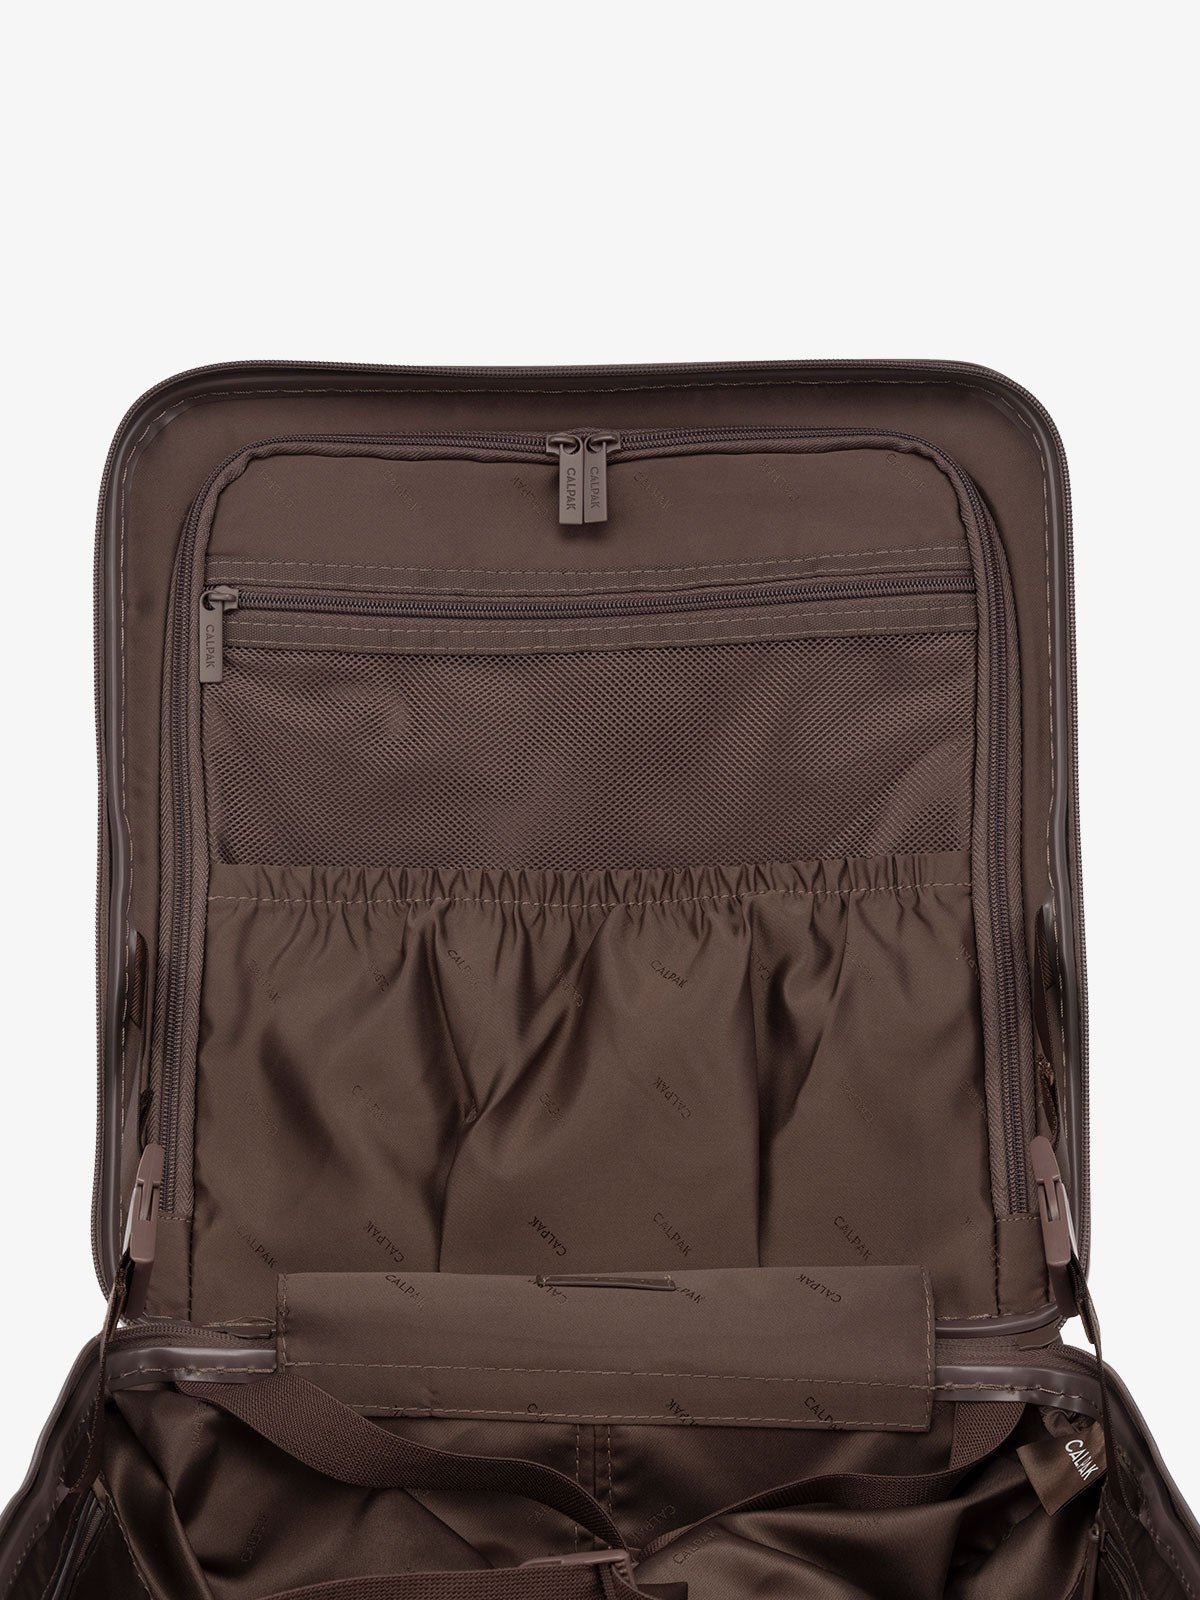 CALPAK TRNK small carry on luggage with divider and multiple pockets in brown